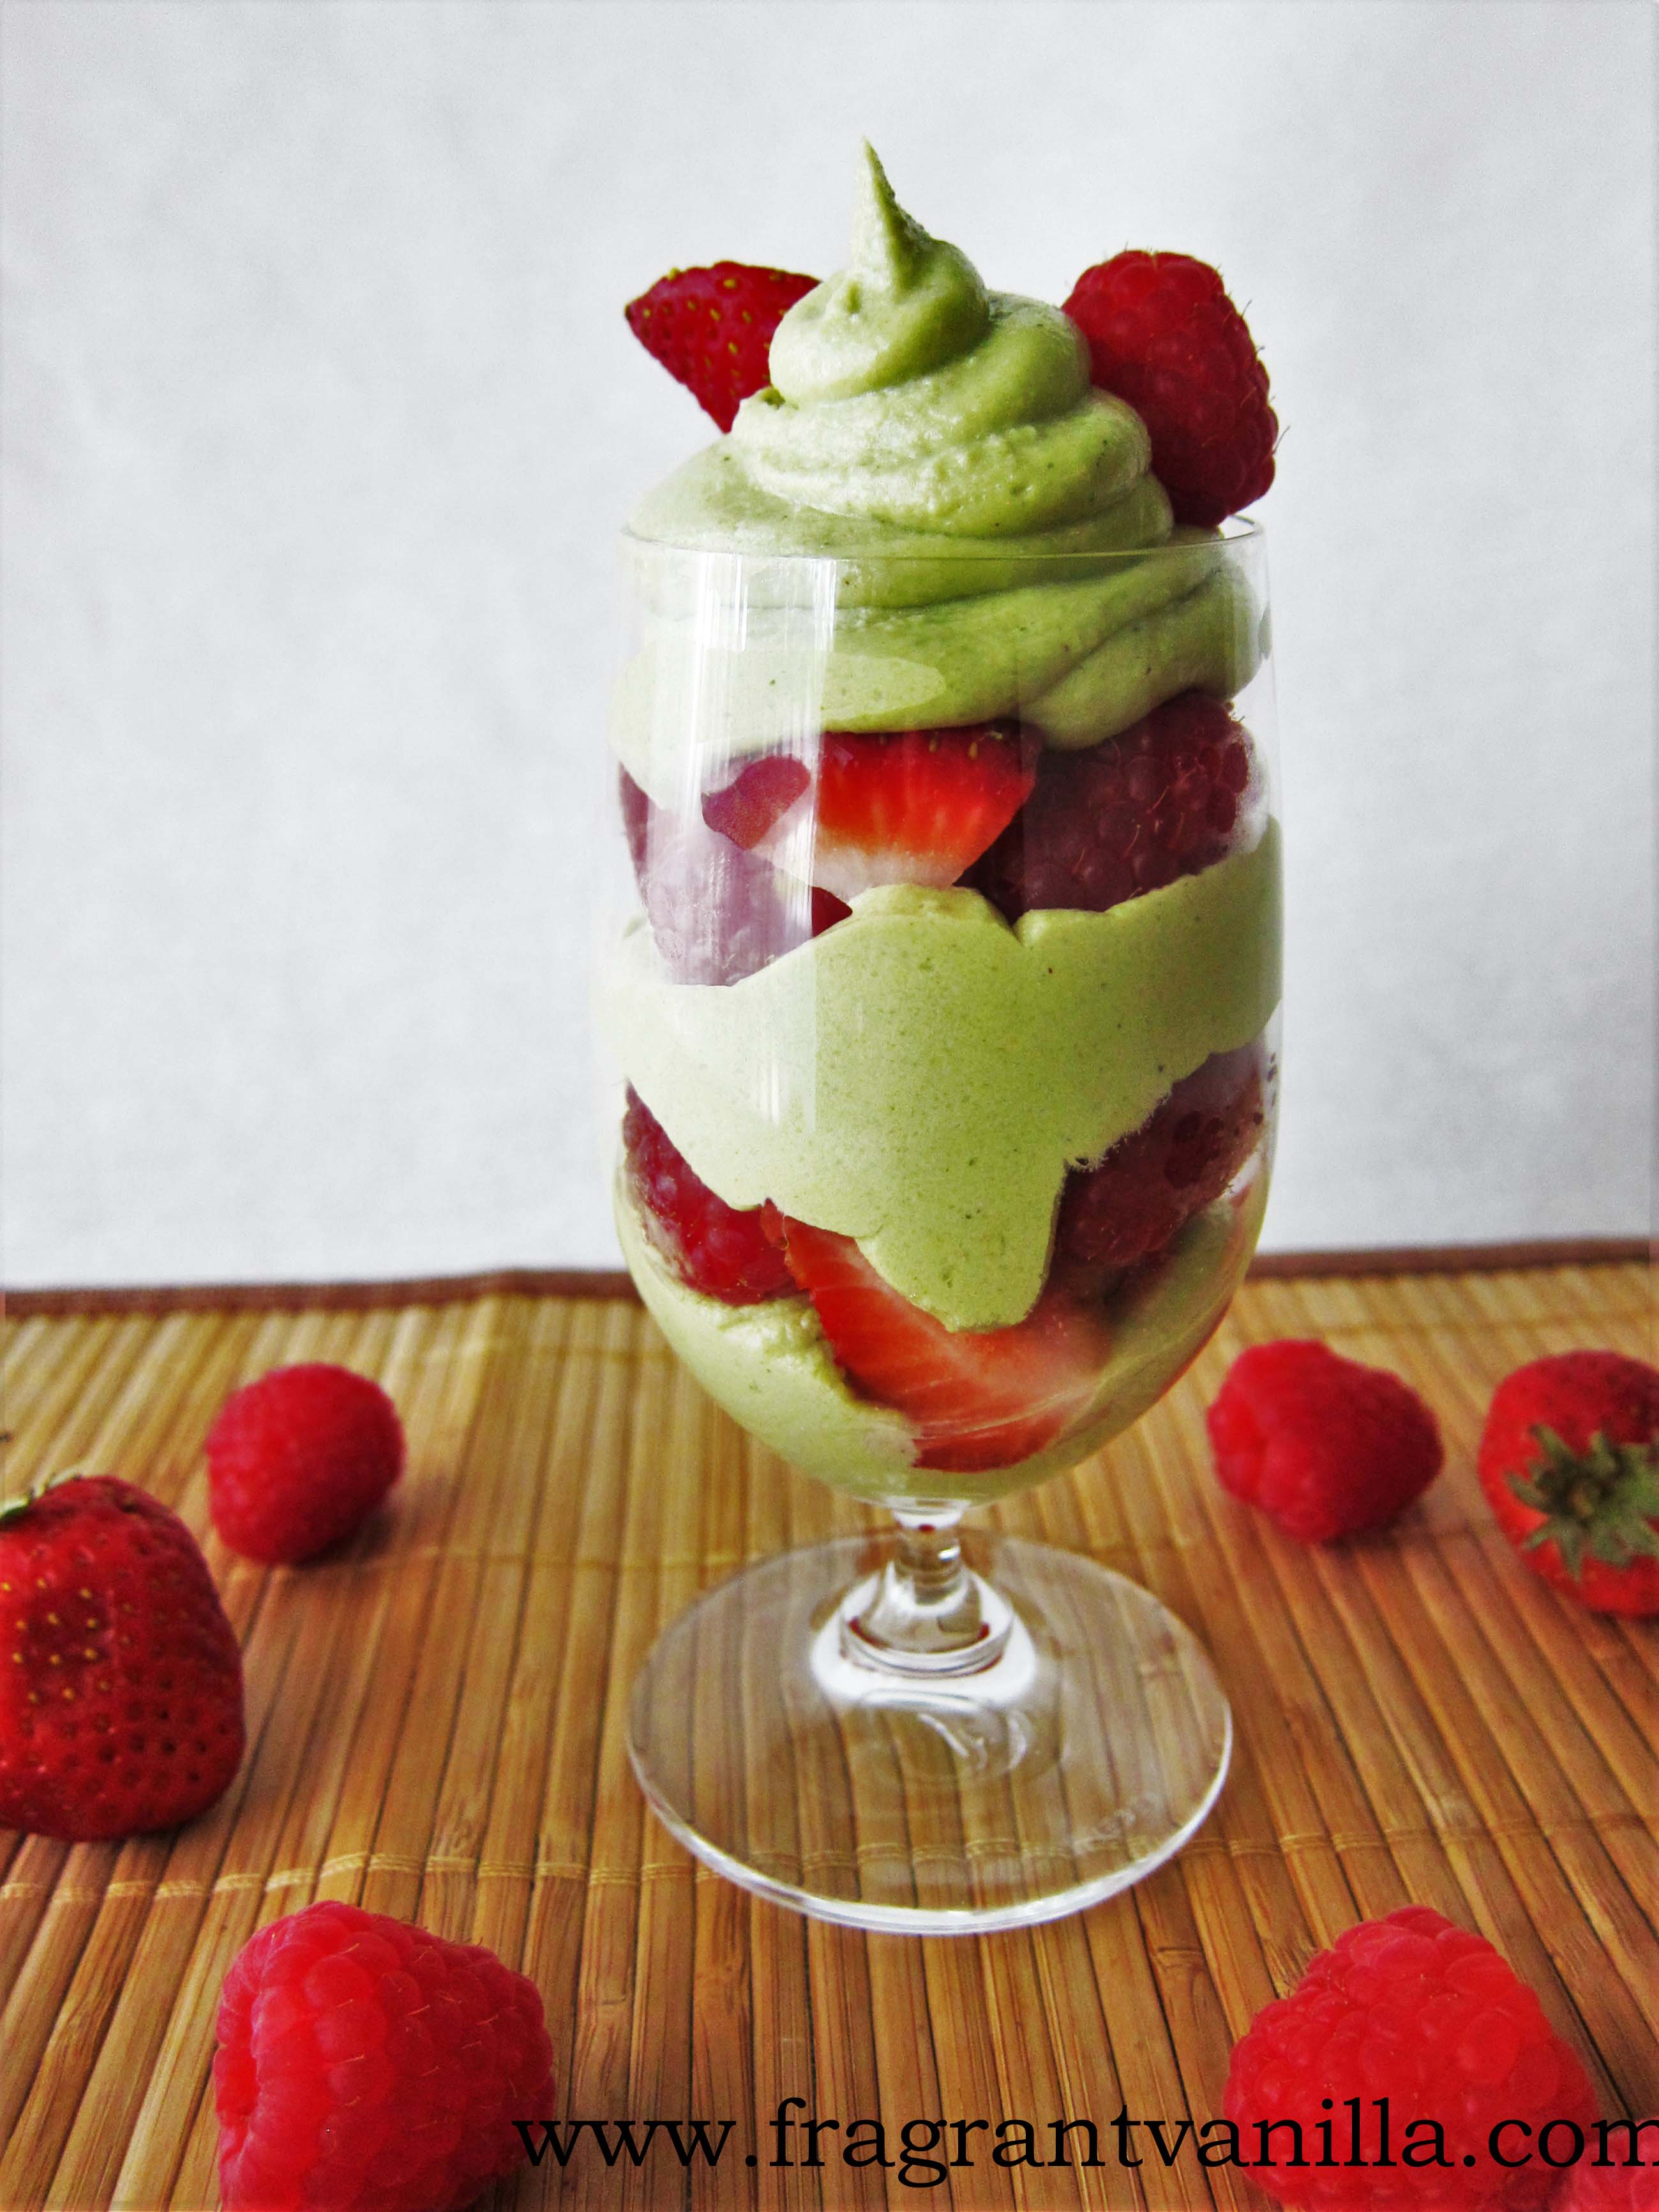 Coconut Matcha Mint Mousse with Berries